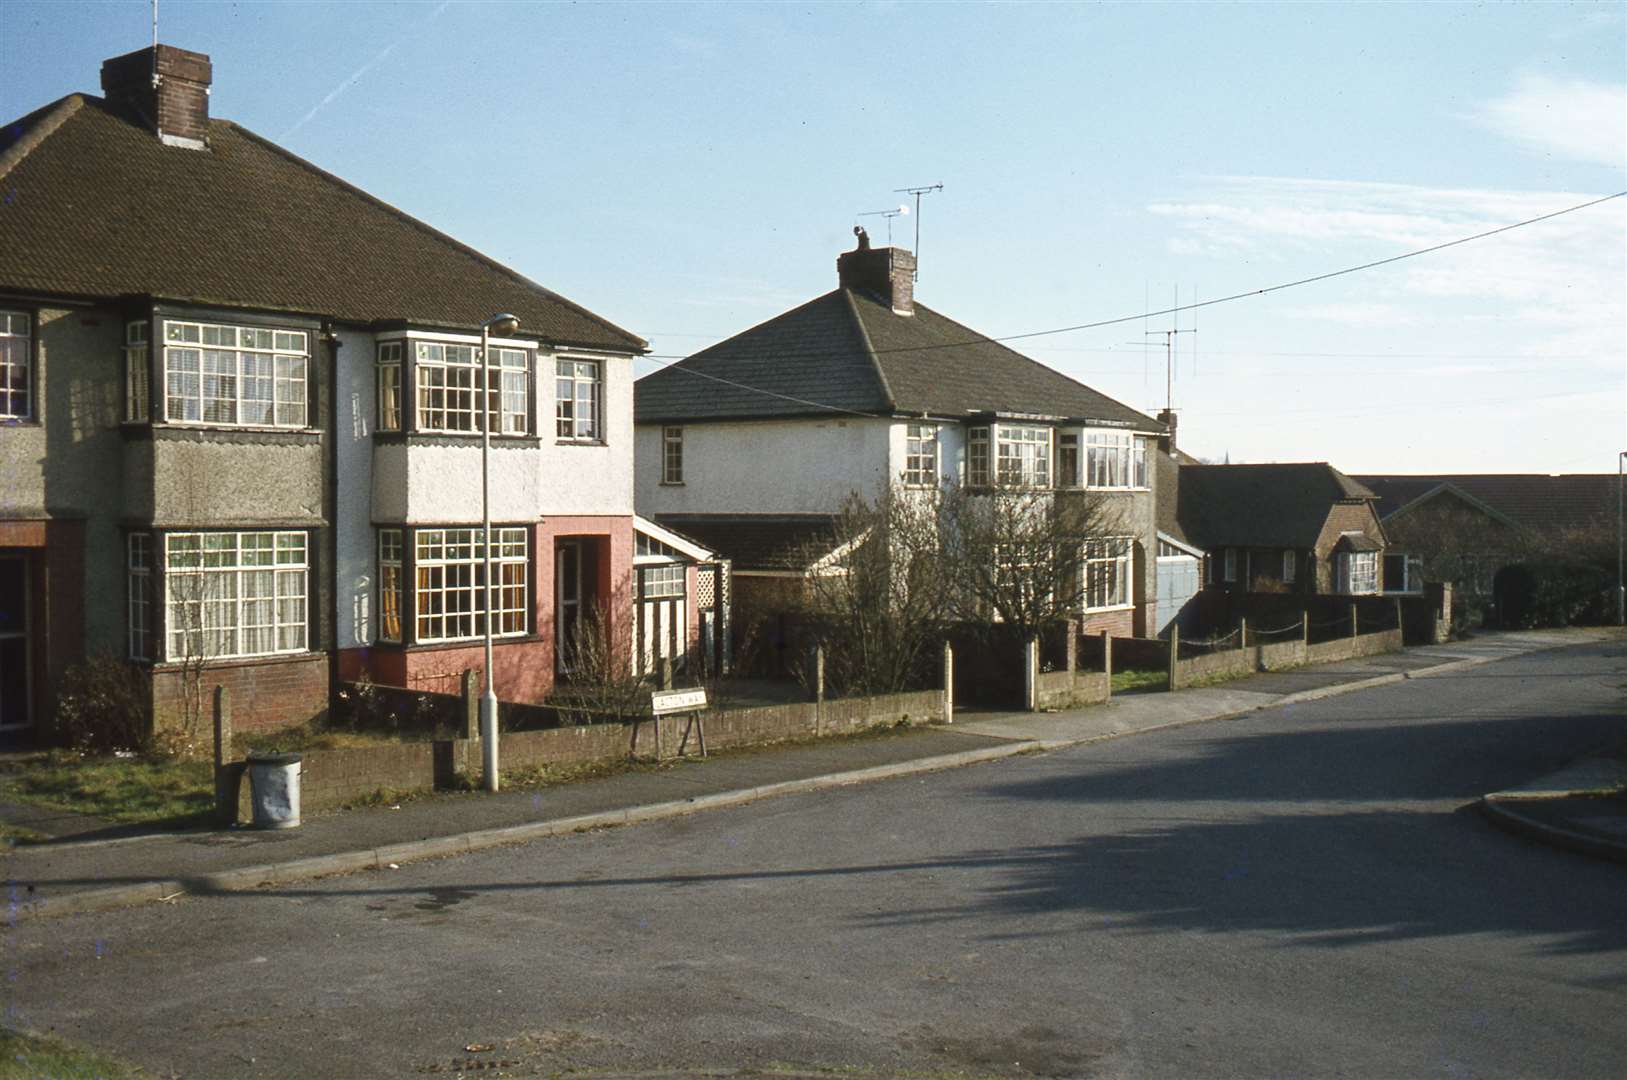 Two of the blighted semi-detached houses in Lacton Way, Willesborough pictured in 1978 and now buried beneath Junction 10. Picture: Neville Marsh